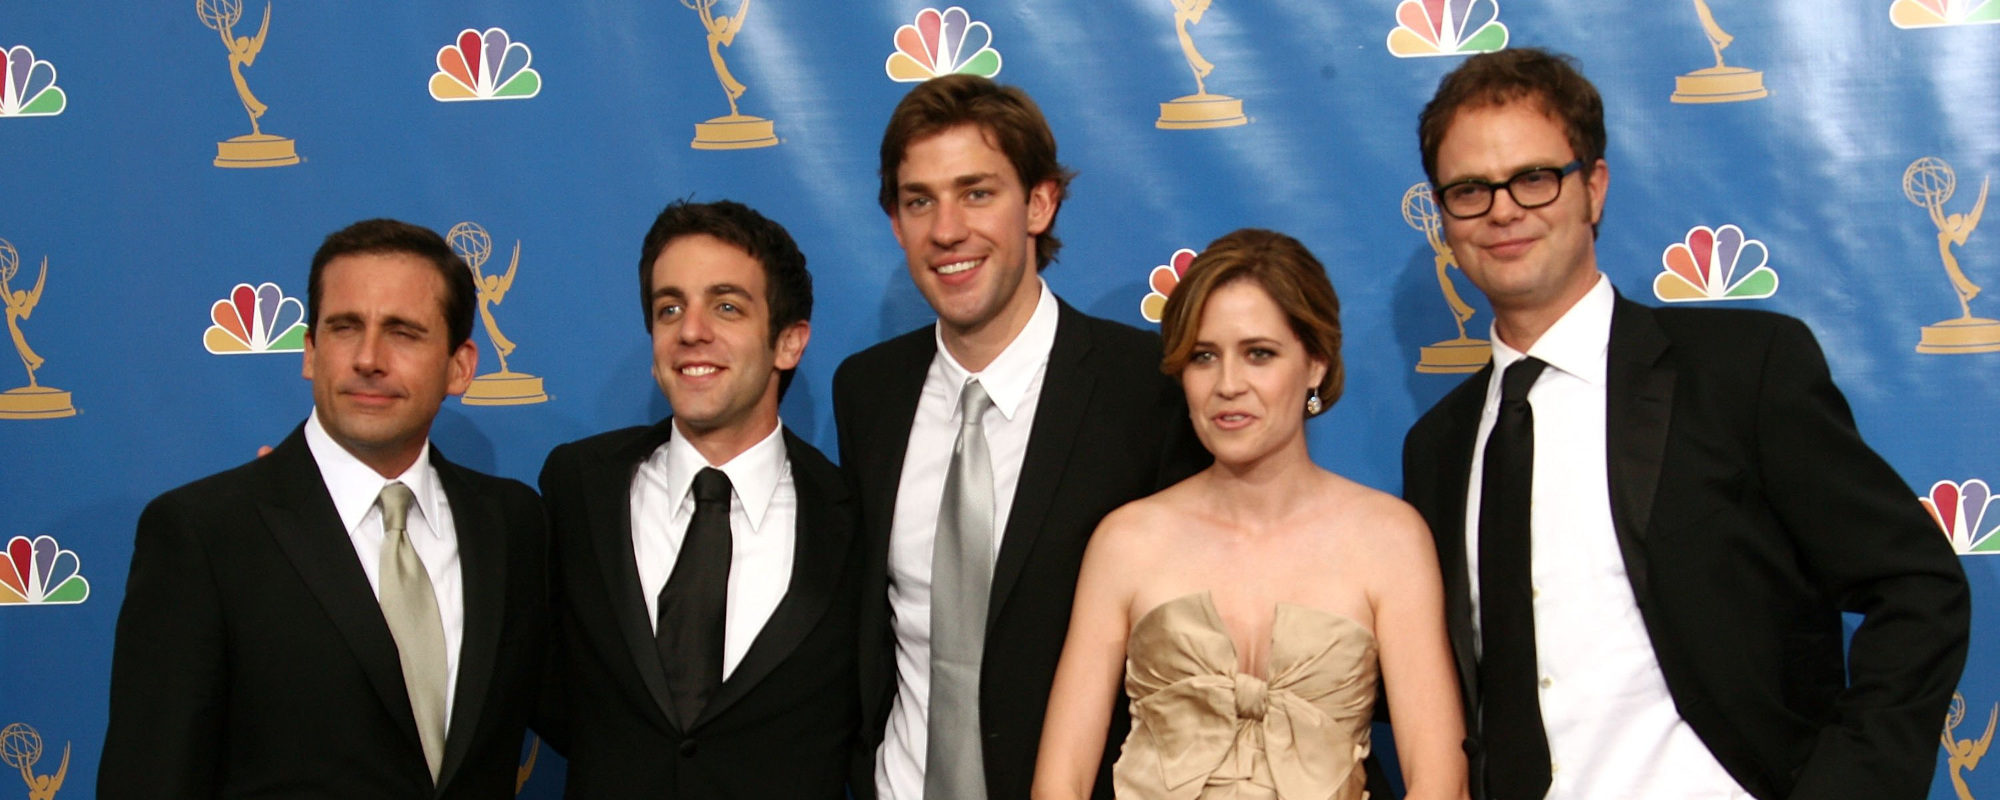 Meet the Writer Behind ‘The Office’ Theme Song